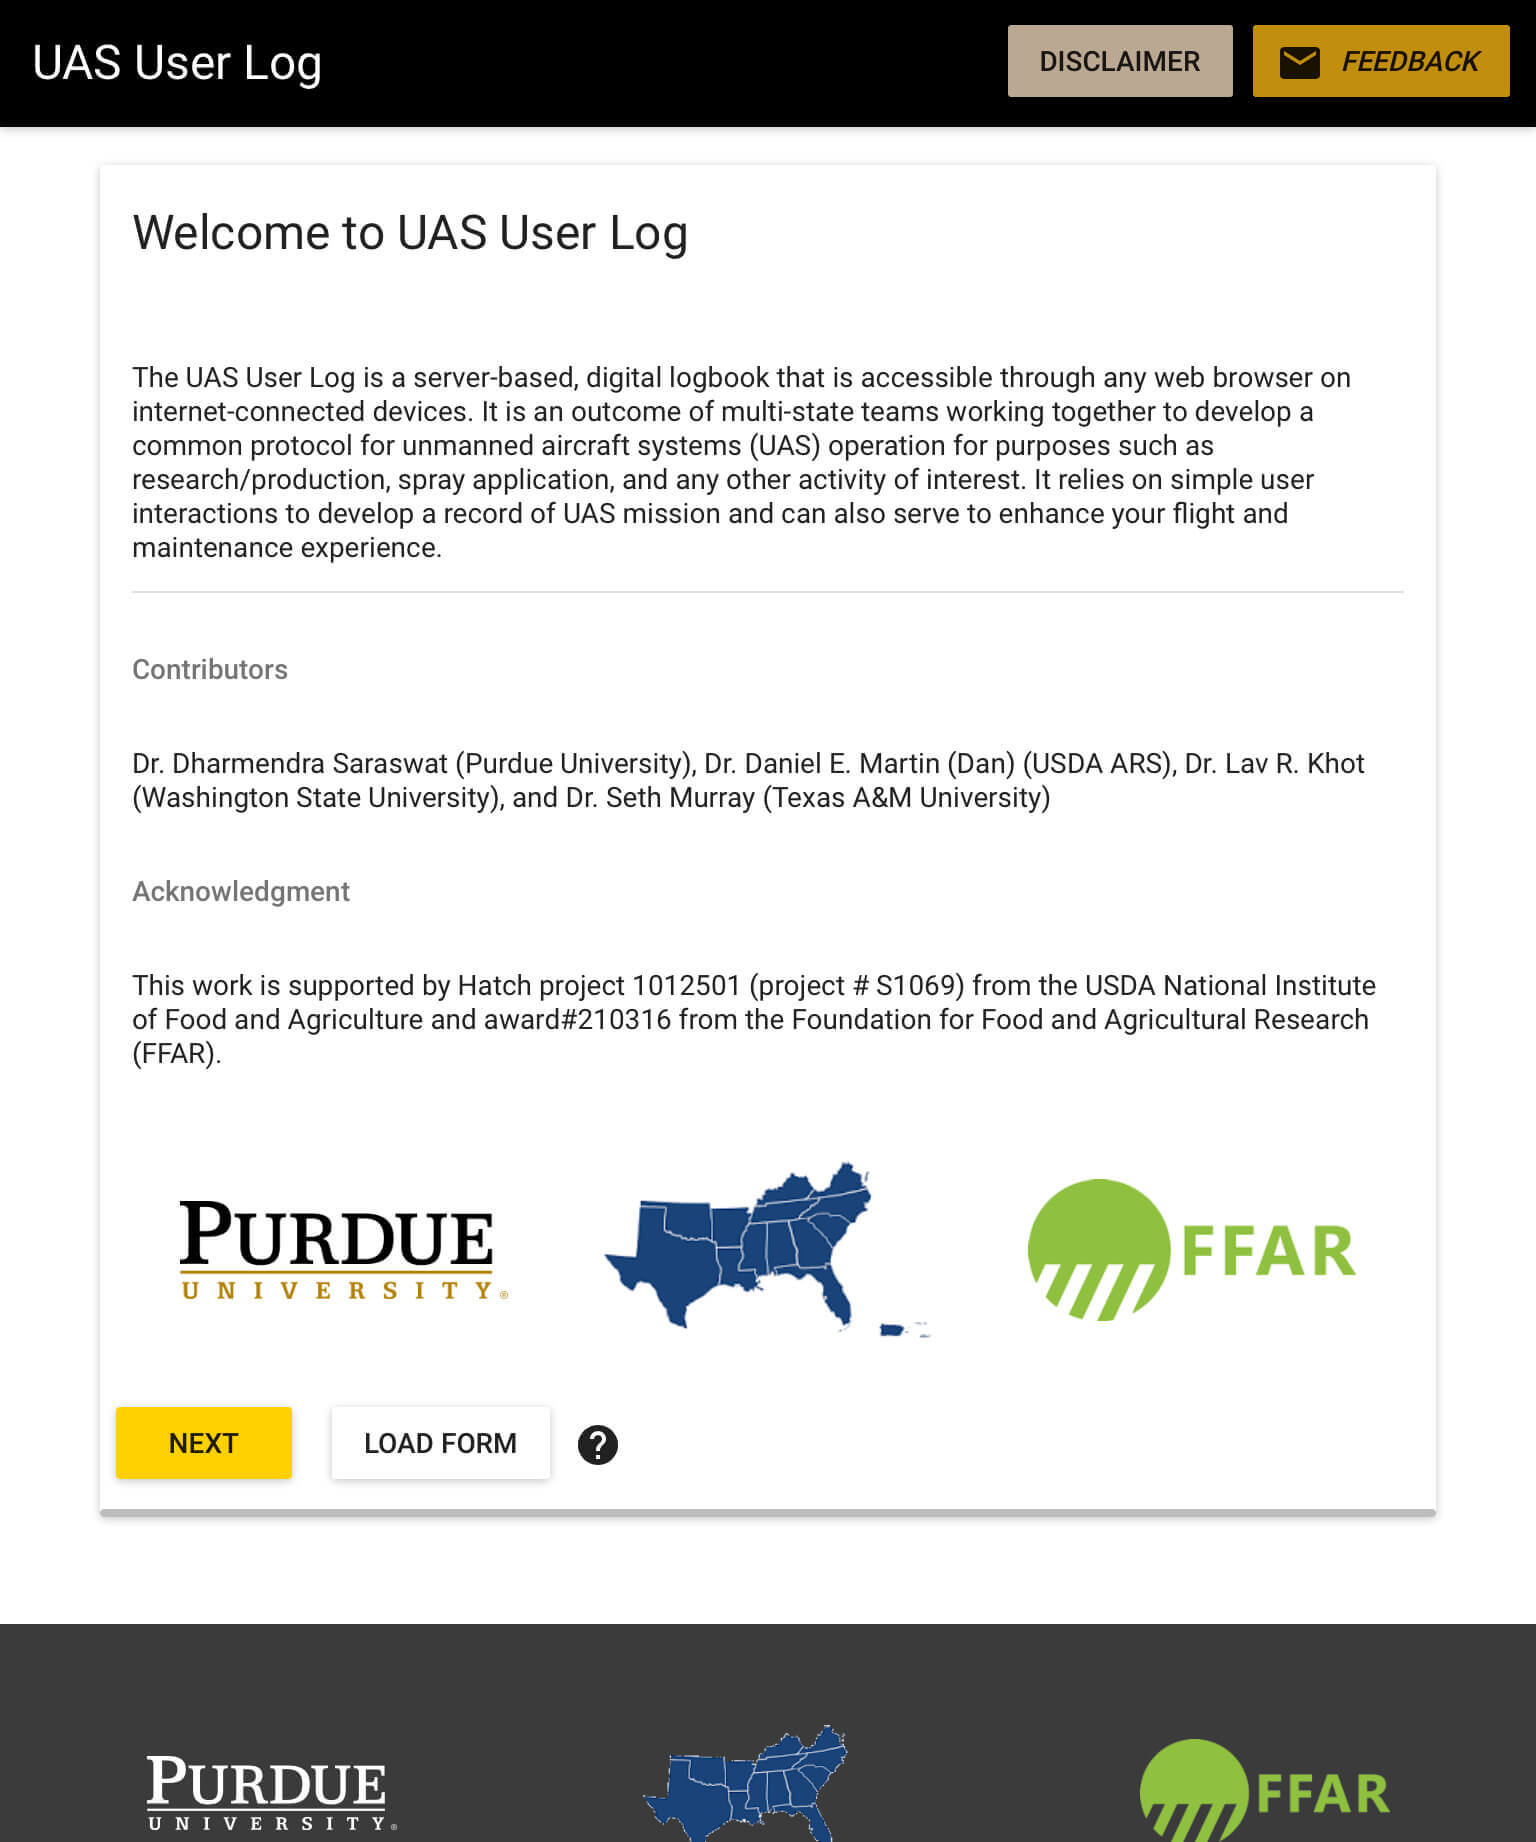 The UAS User Log can be accessed from any internet-connected device, including tablets and smartphones.